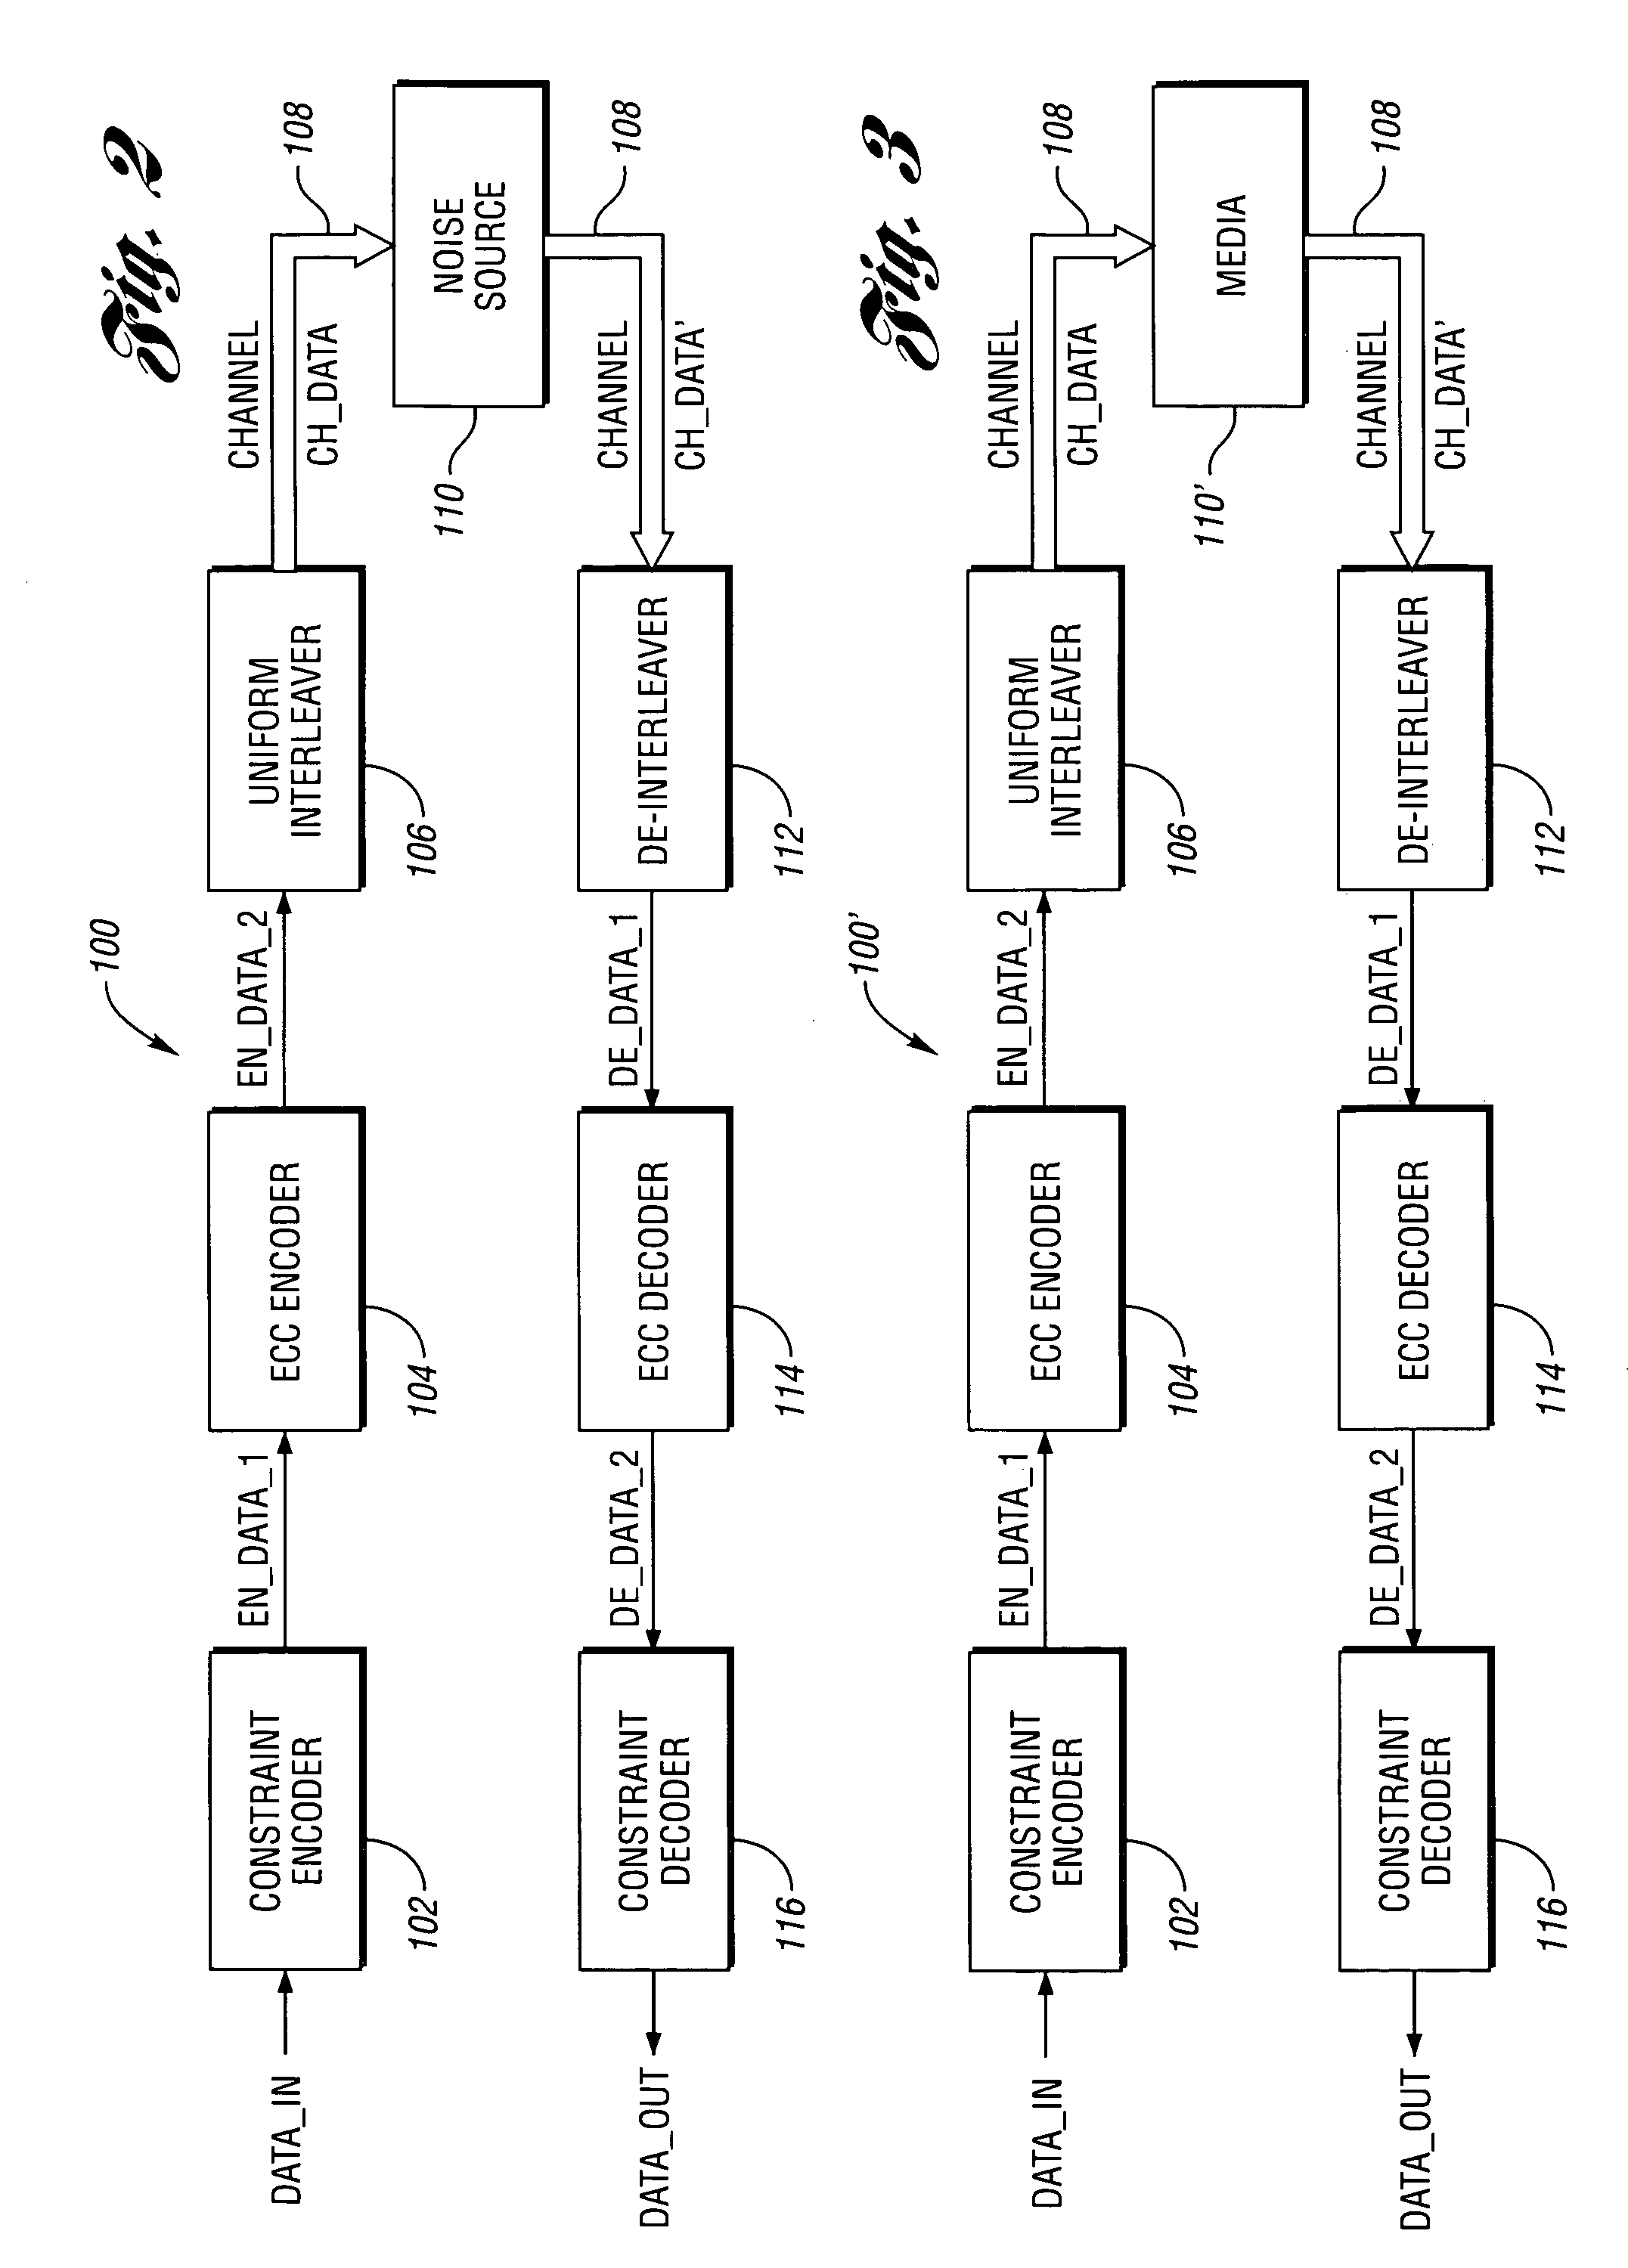 System and method for reverse error correction coding